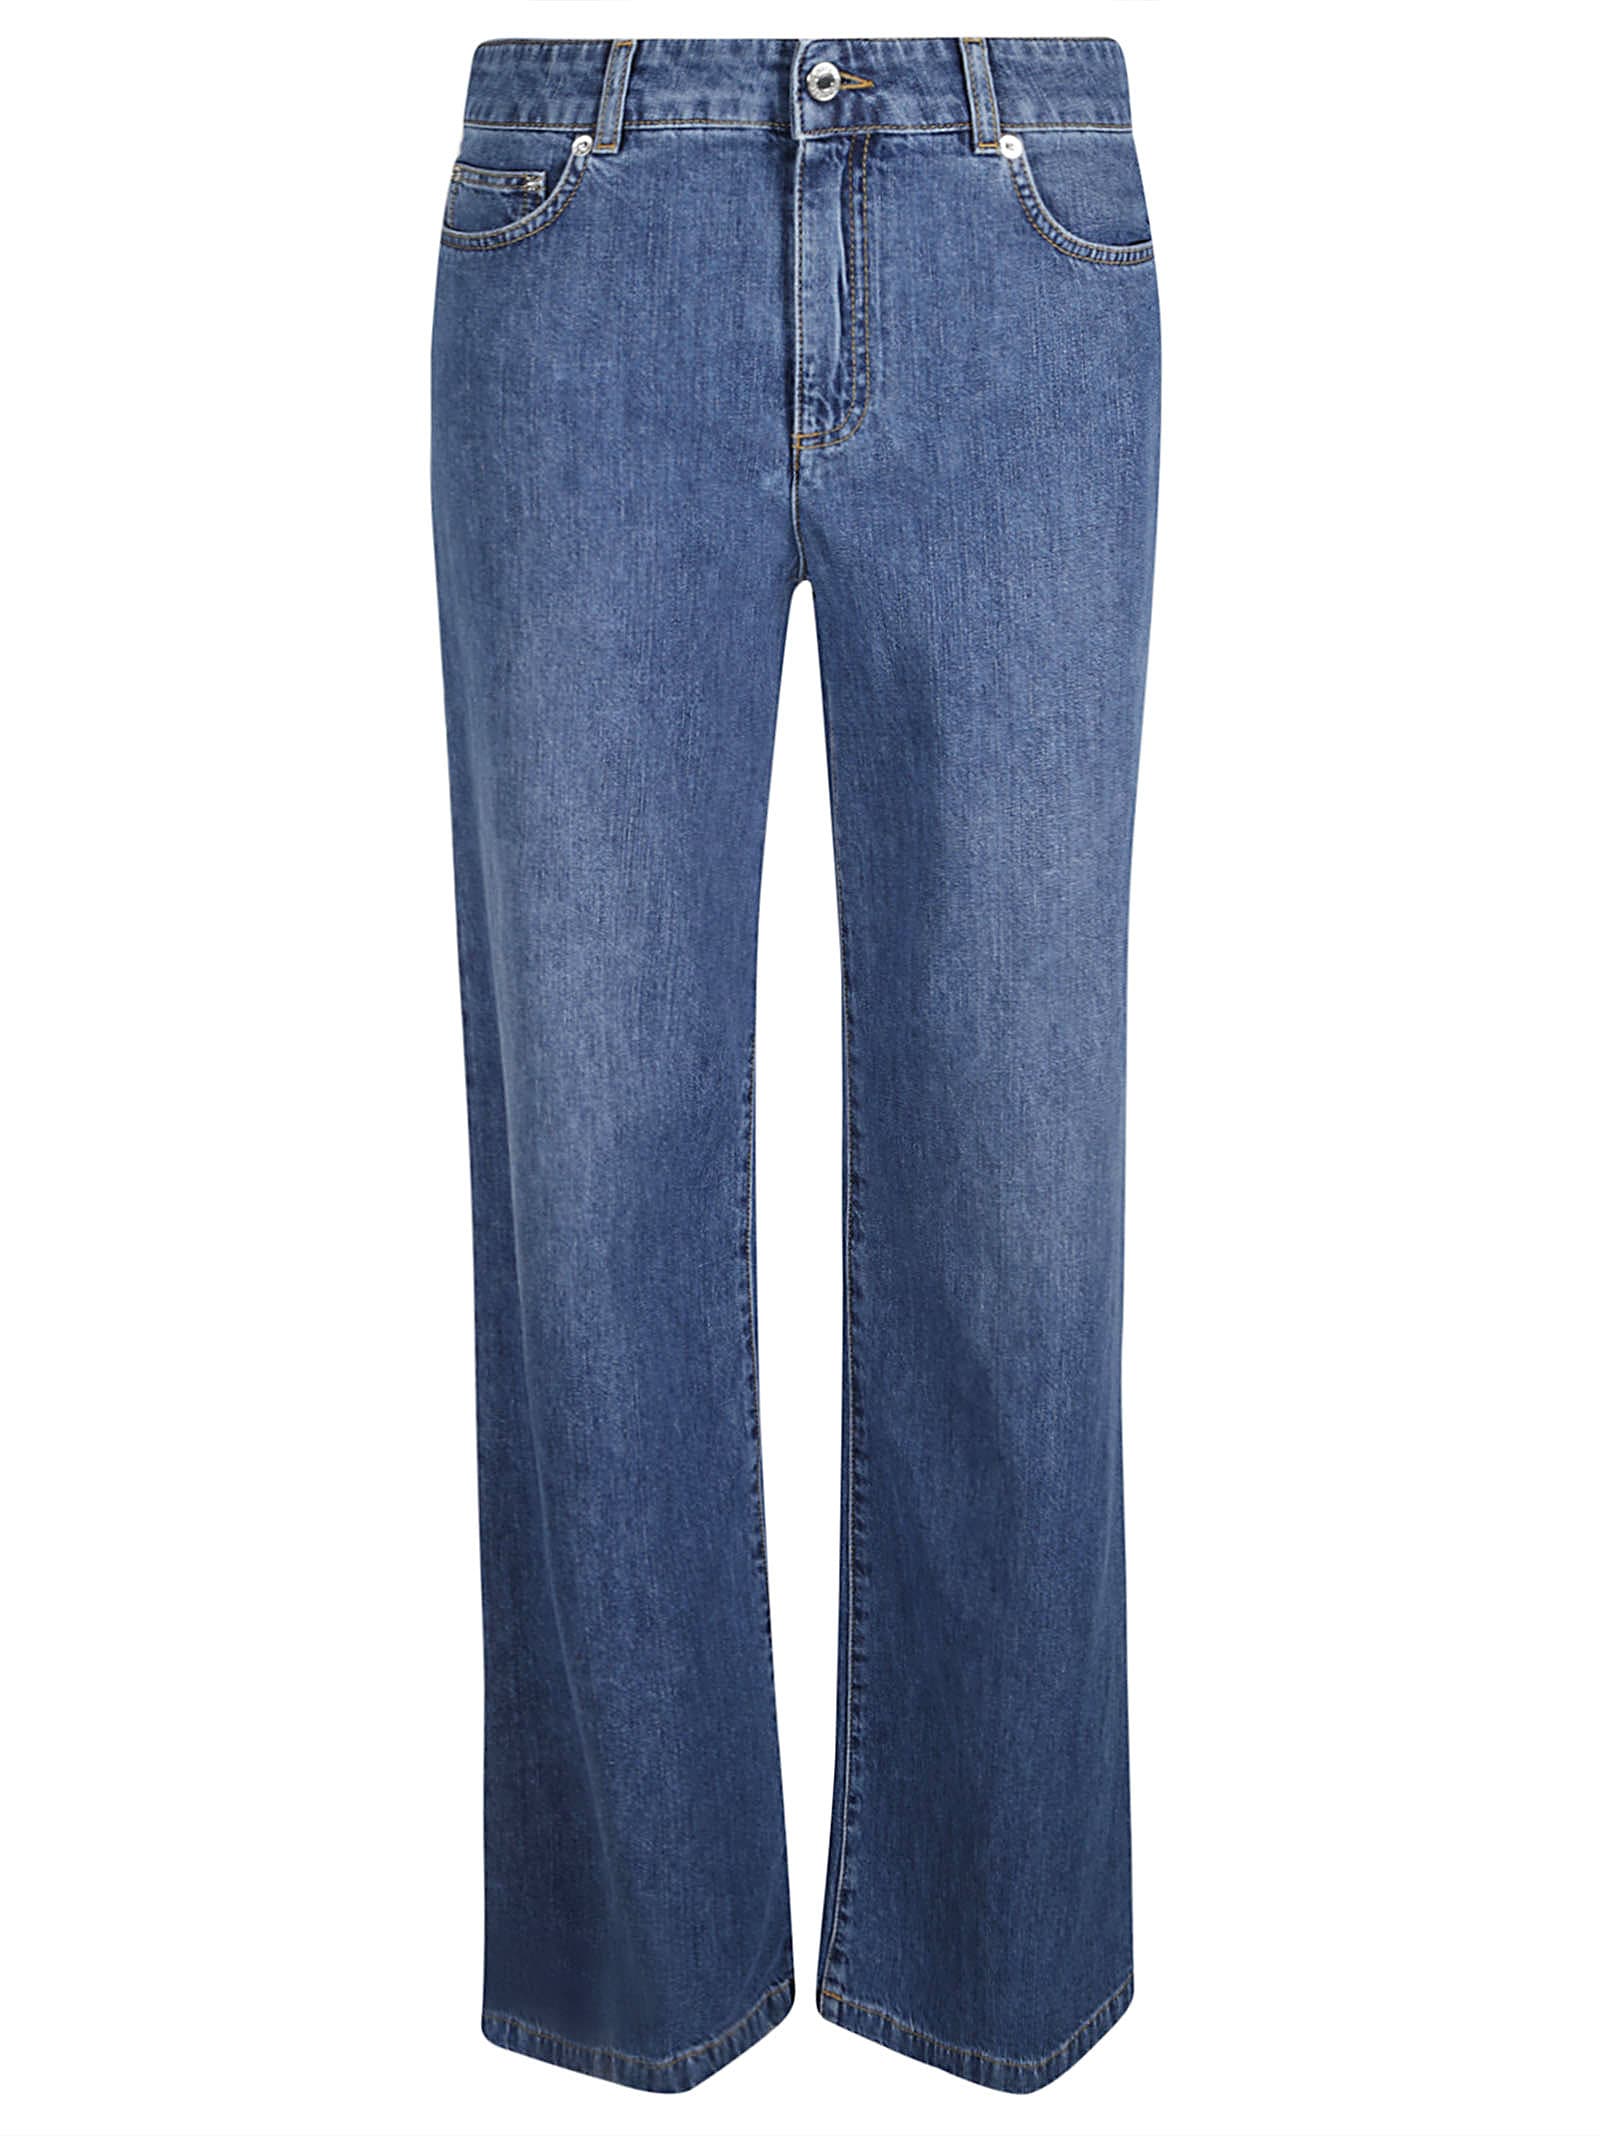 MOSCHINO FLARED LEG JEANS